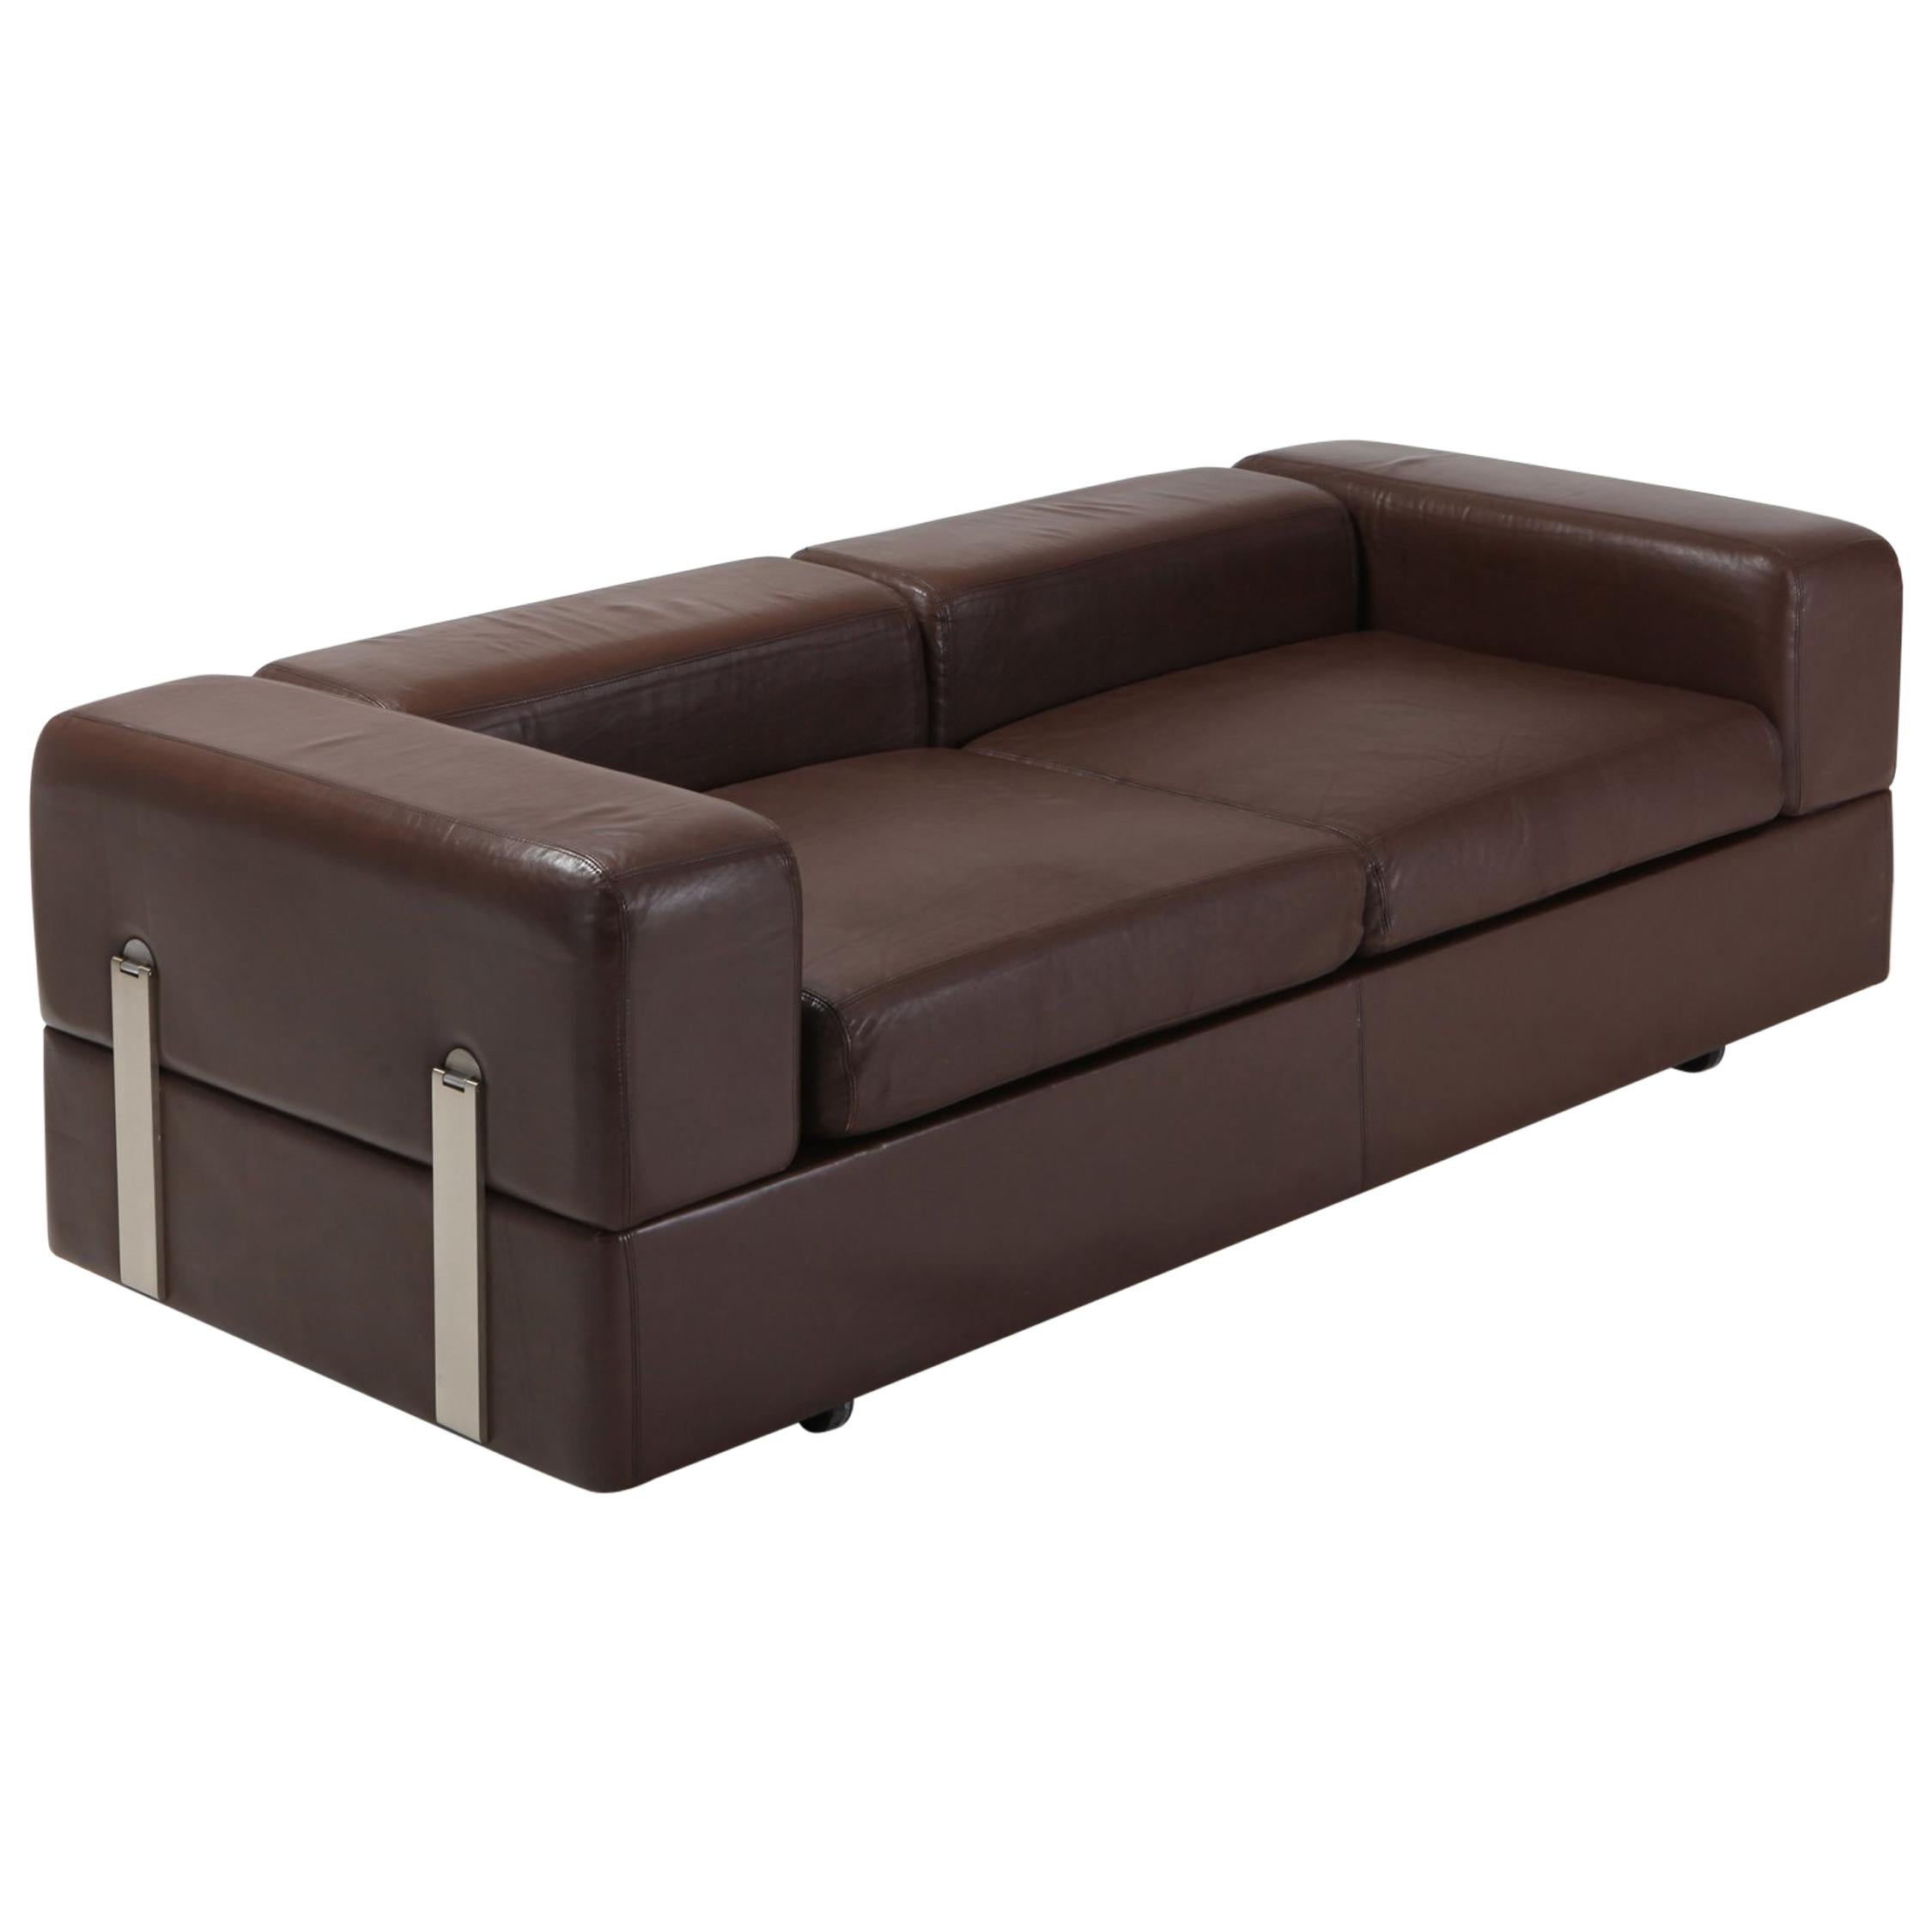 Italian Daybed Sofa Set of 2 711 by Tito Agnoli for Cinova in Brown Leather